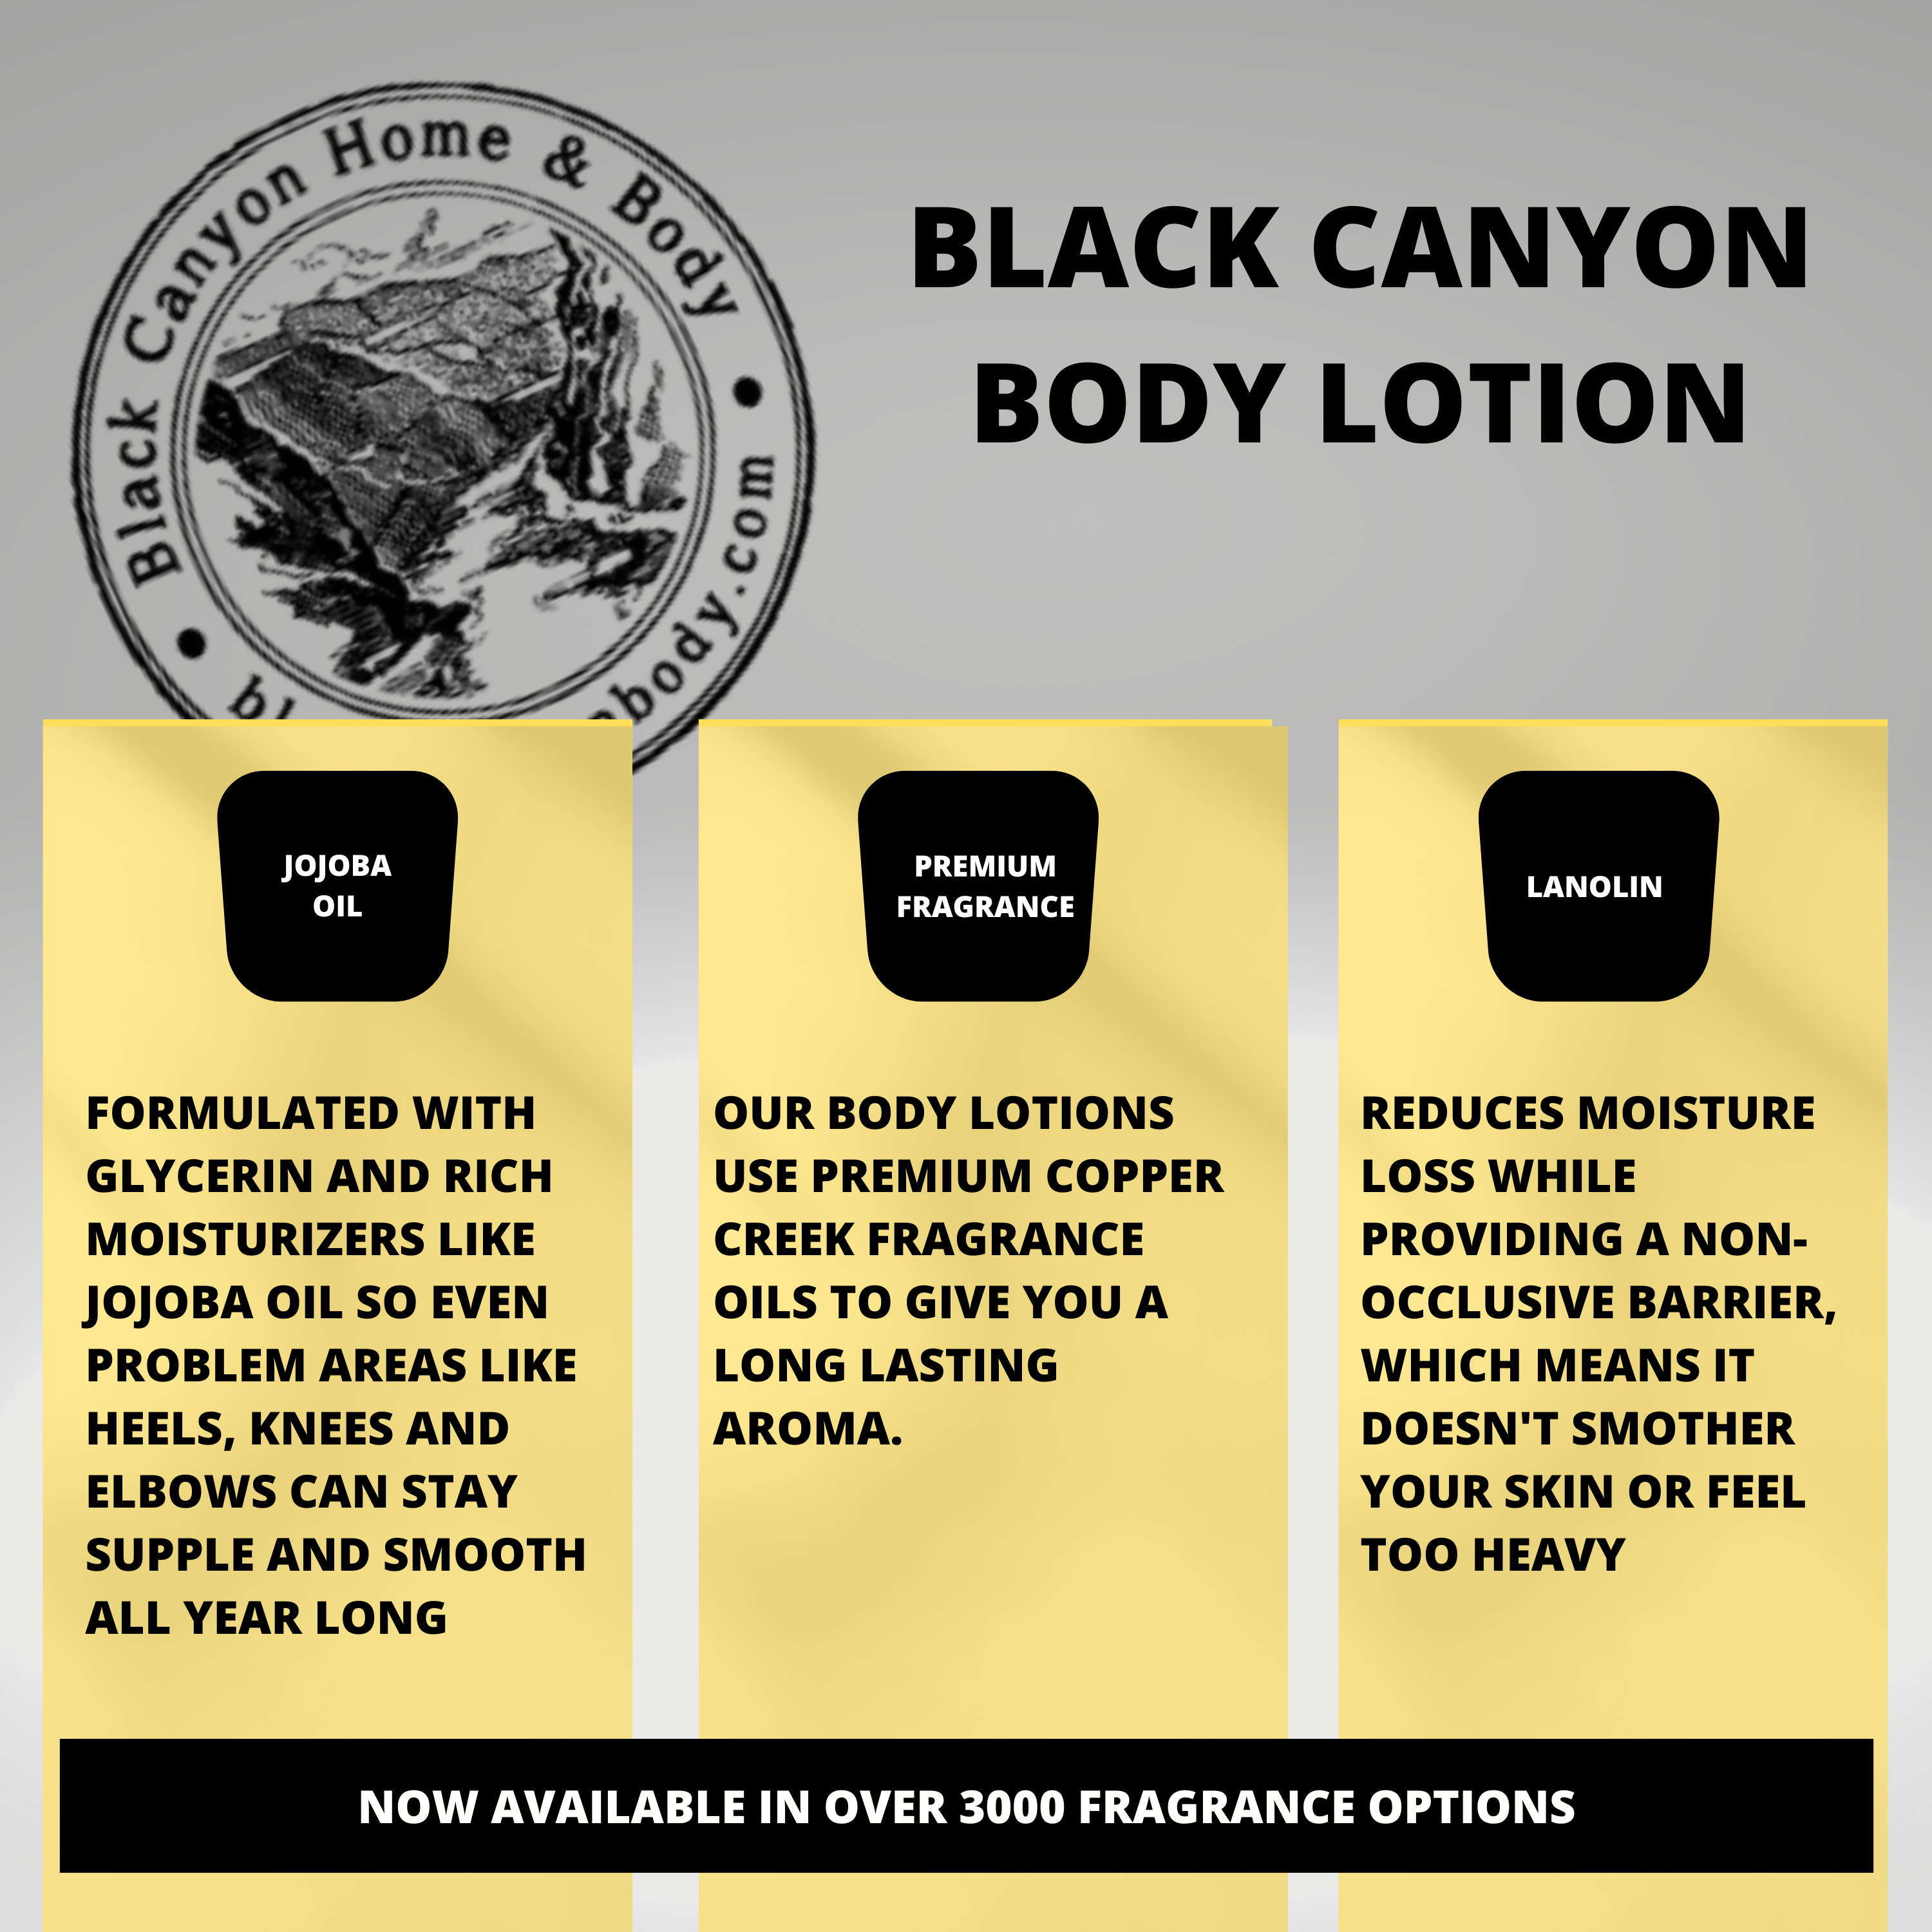 Black Canyon Chocolate Mousse Scented Luxury Body Lotion with Lanolin and Jojoba Oil